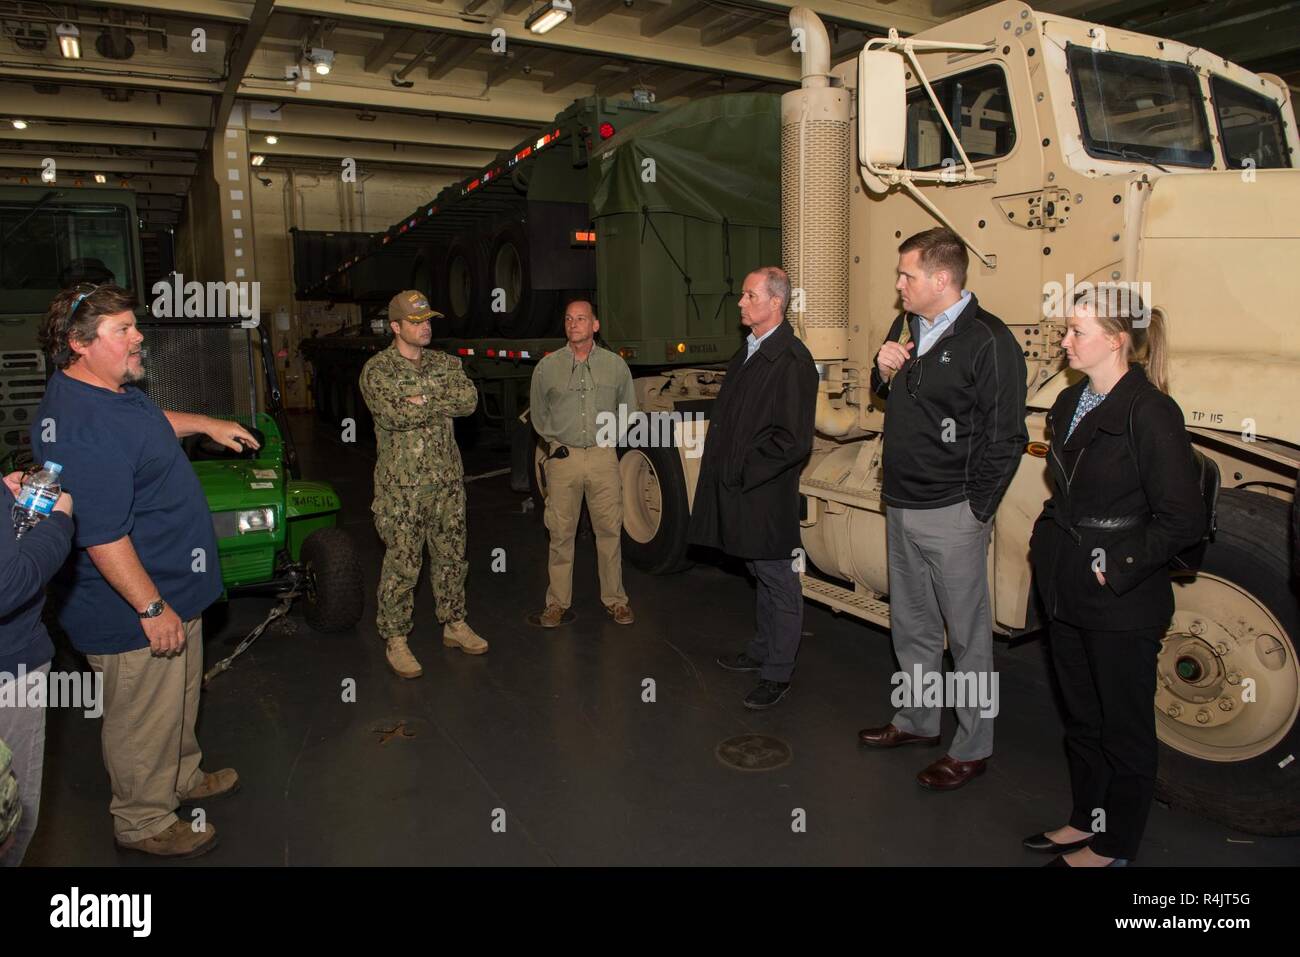 BUSAN, Republic of Korea (Oct. 30, 2018) U.S. Rep. William McClellan 'Mac' Thornberry, chairman of the House Armed Services Committee (HASC), receives a tour of the Watson-class vehicle cargo ship USNS Red Cloud (T-AKR-313) at the Military Sealift Command (MSCO) in Busan. Thornberry's visit to MSCO is part of an overall site visit to the Korean peninsula to meet with U.S. military components and gain a better understanding of the U.S. and ROK alliance. Stock Photo